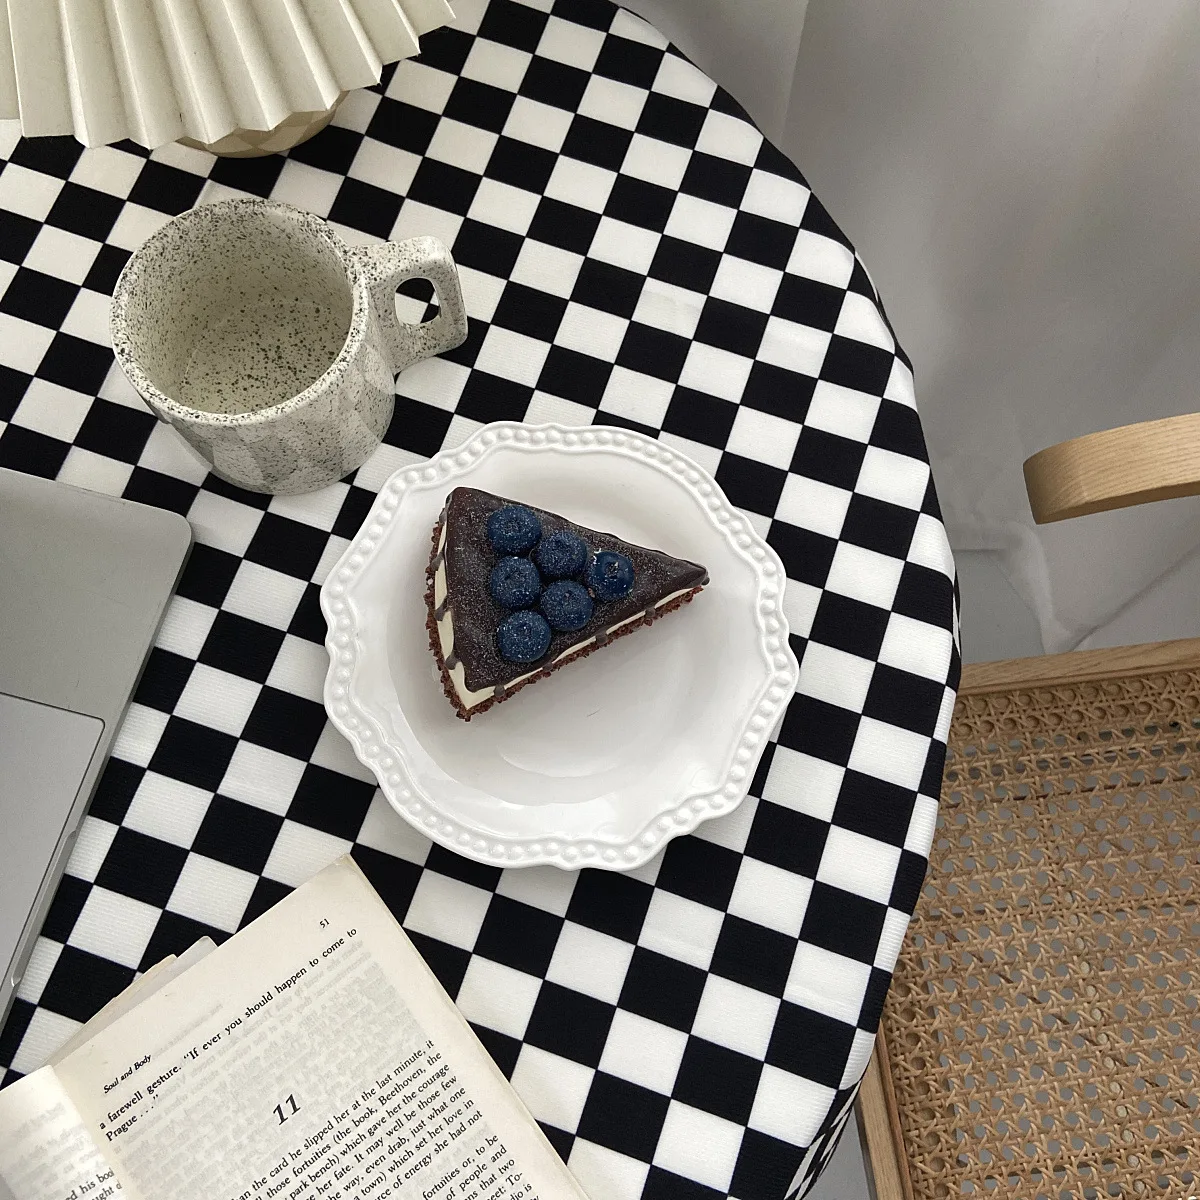 

Black and White Lattice Table Cover Waterproof Rectangular Tablecloths Coffee Tables Table Cloth Party Decoration Nappe De Table